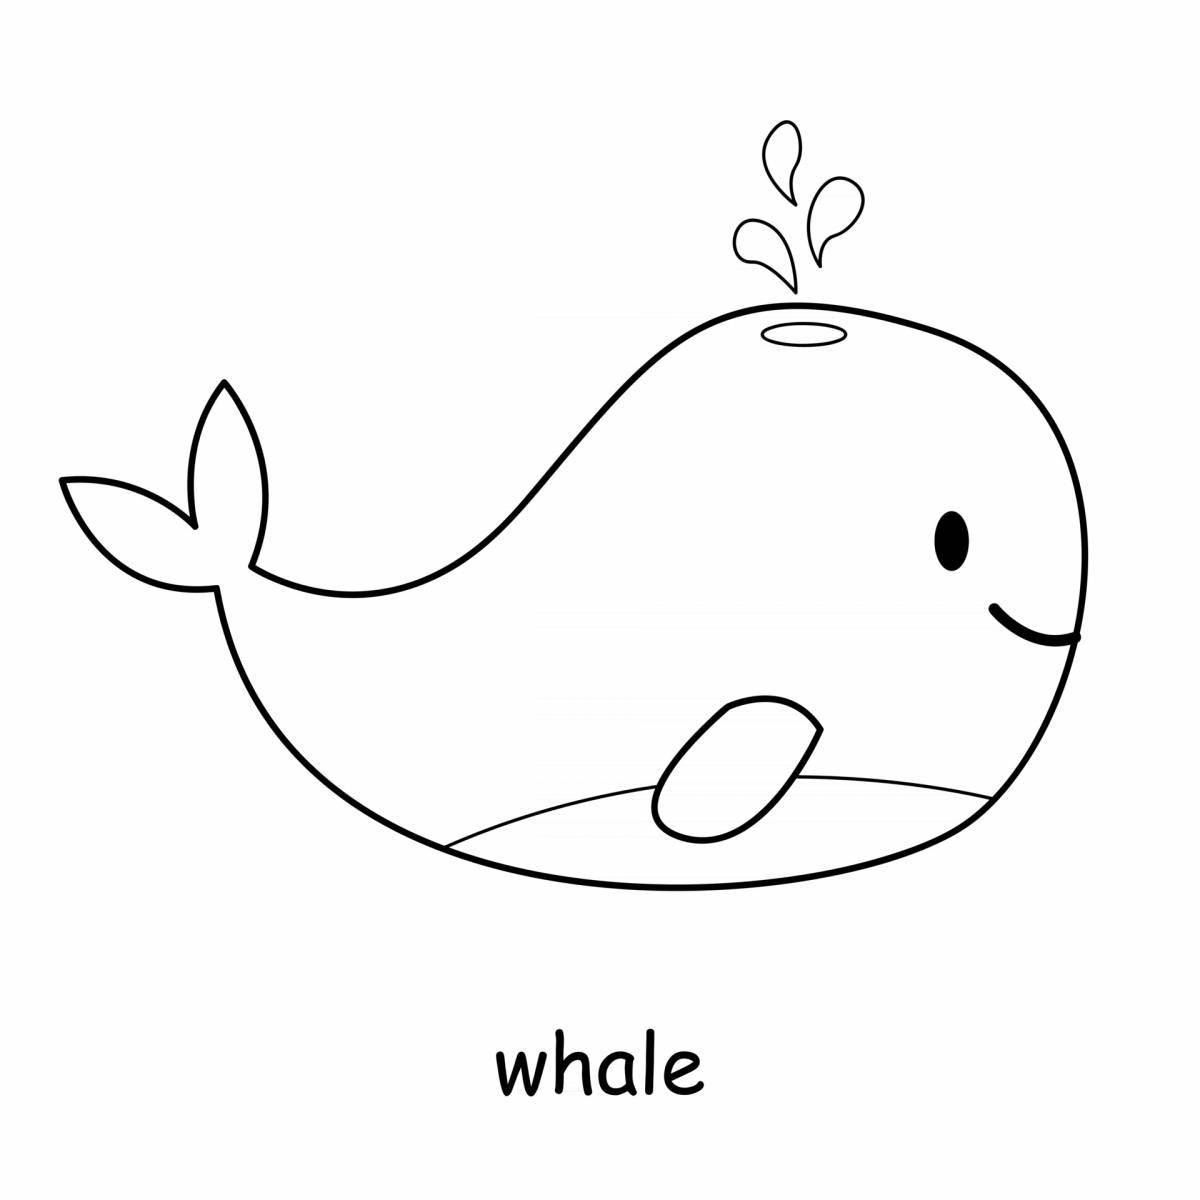 Coloring book with whales for children 3-4 years old